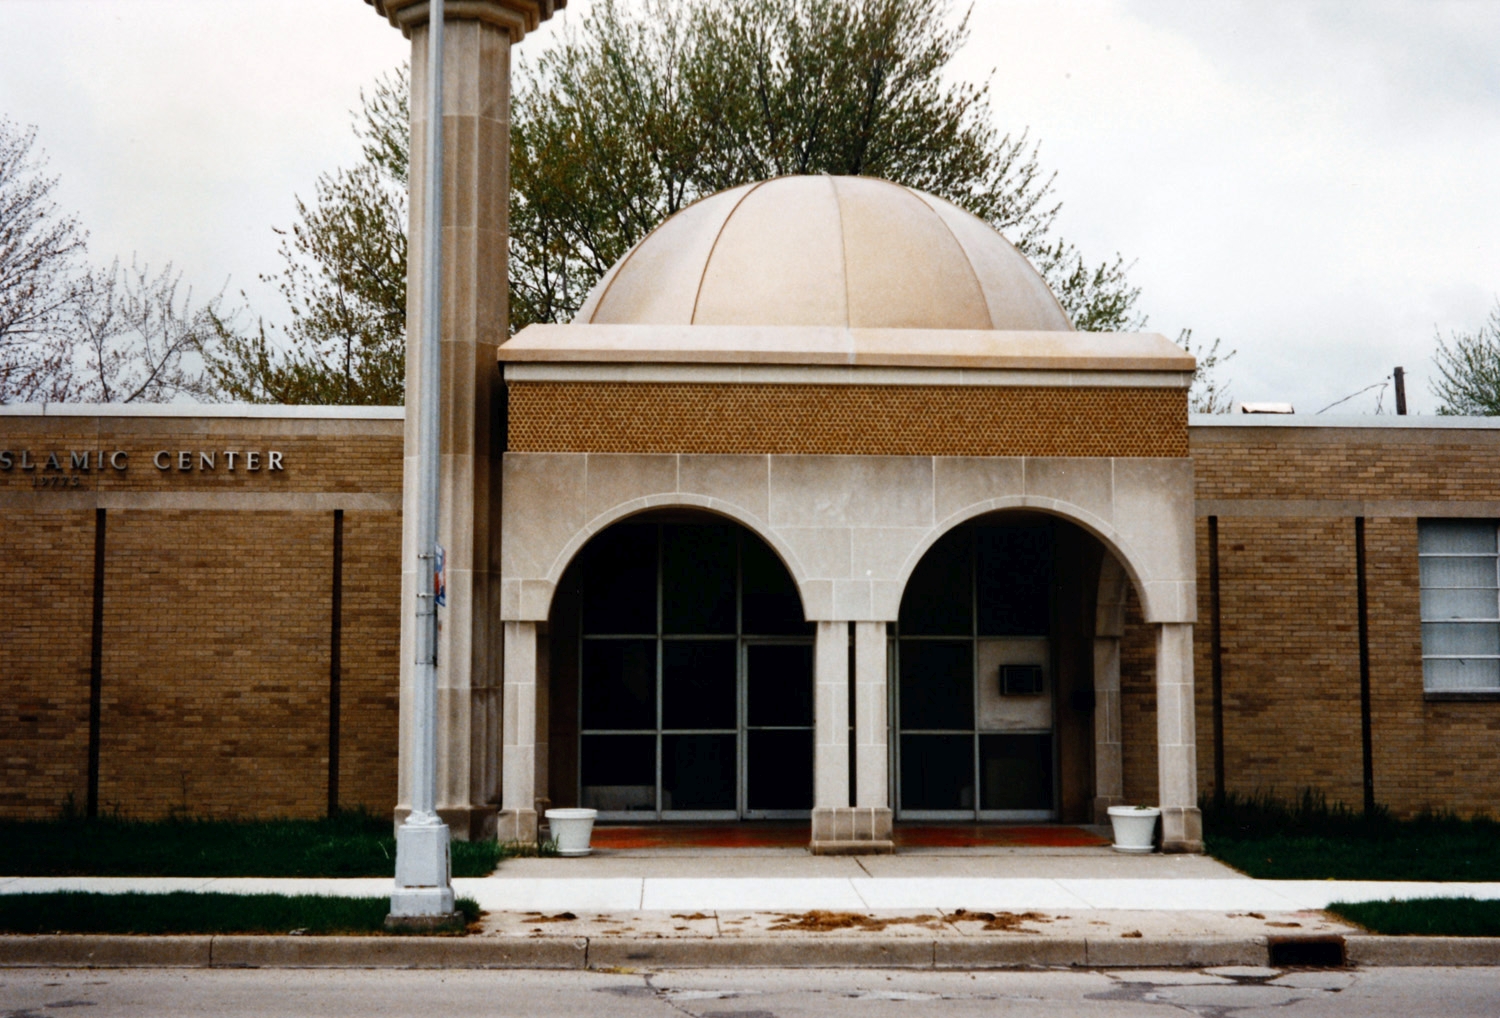 Albanian Islamic Center - Entrance portico with dome above, and base of minaret